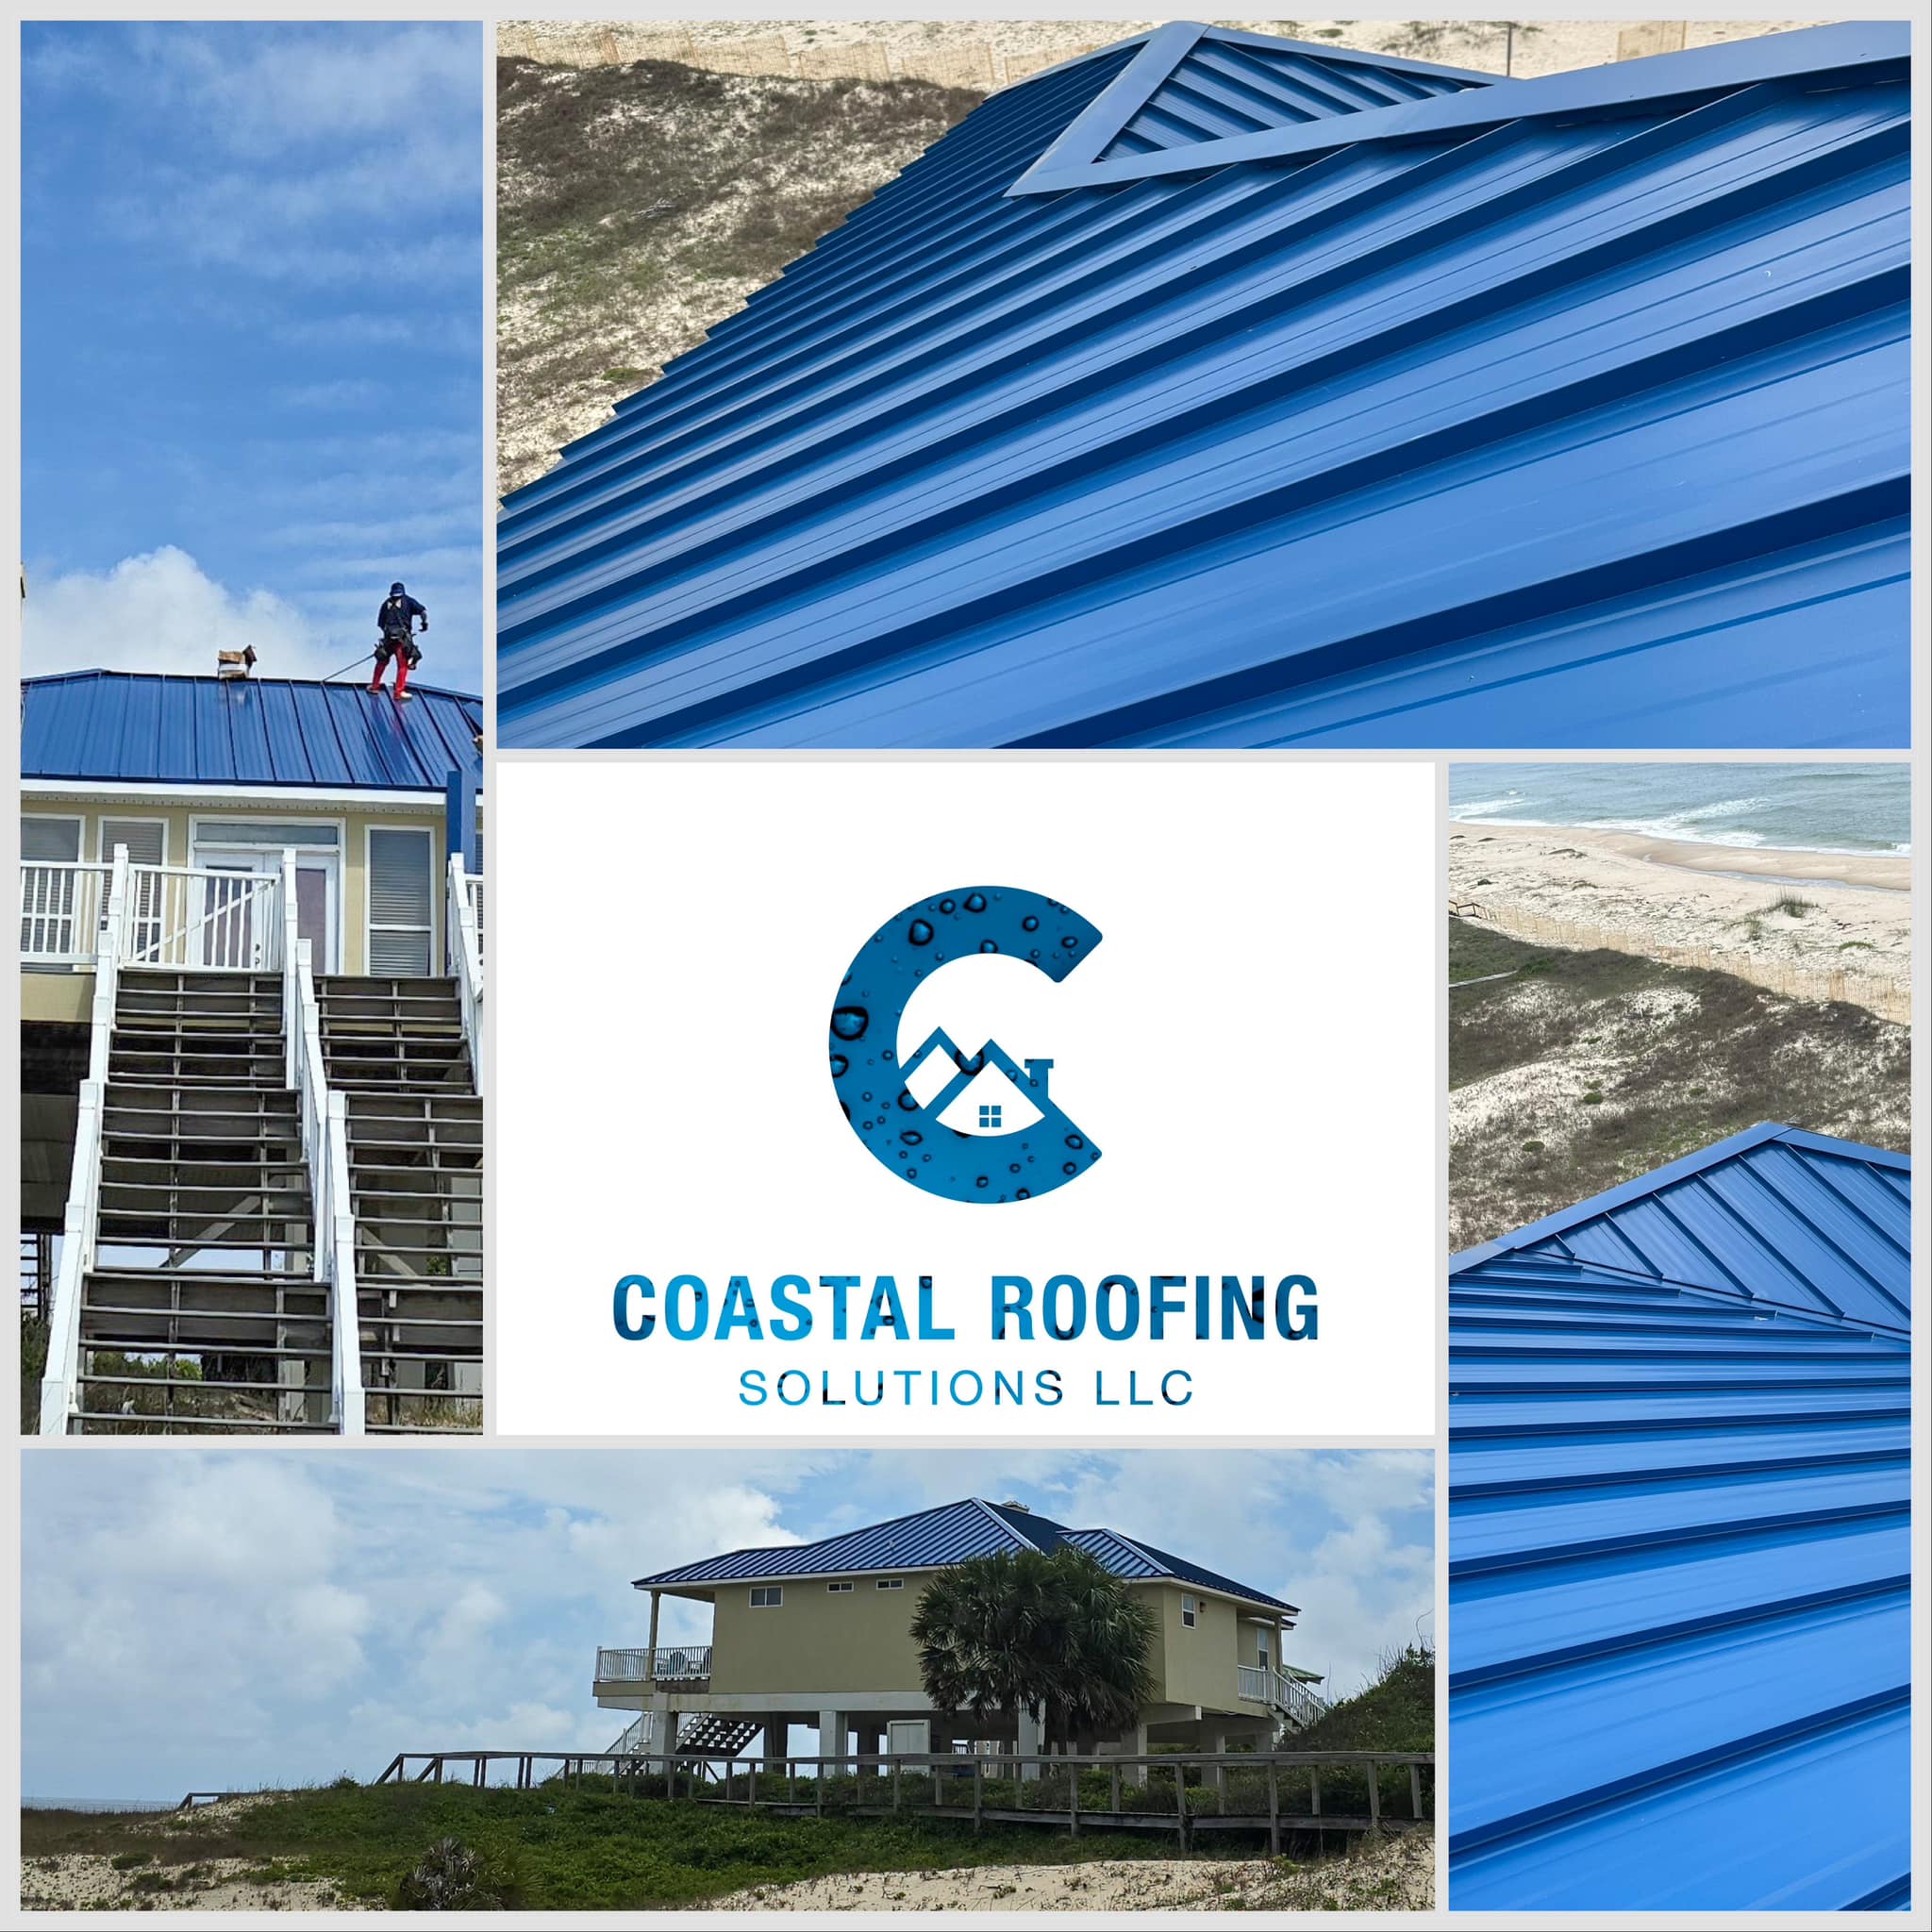 Coastal Roofing Solutions - Gallery 2